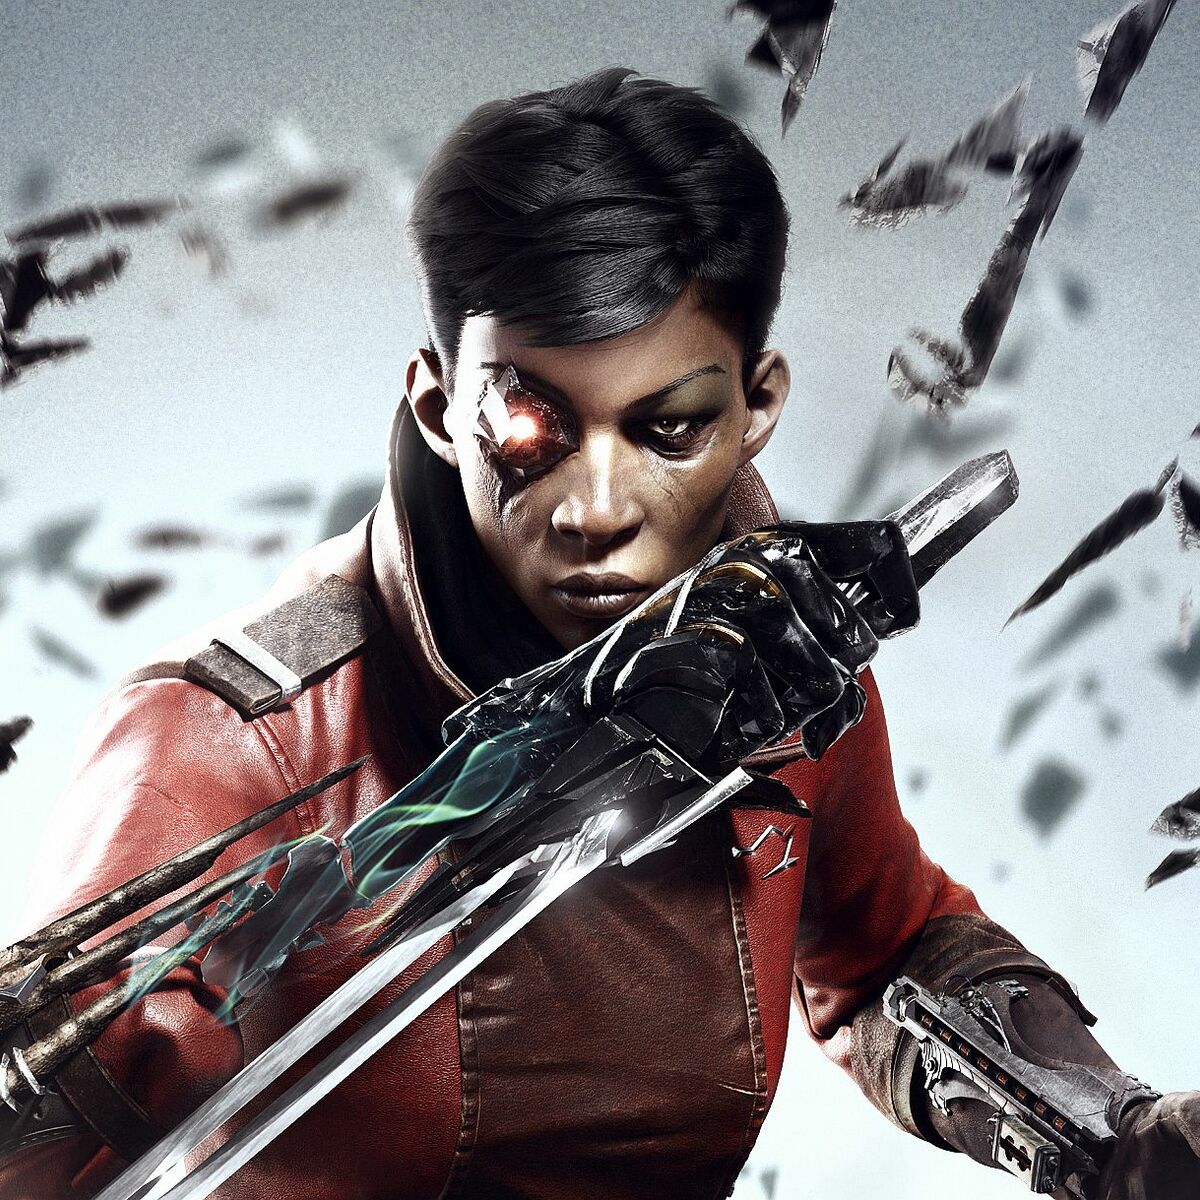 Dishonored: Death of the Outsider Wallpapers